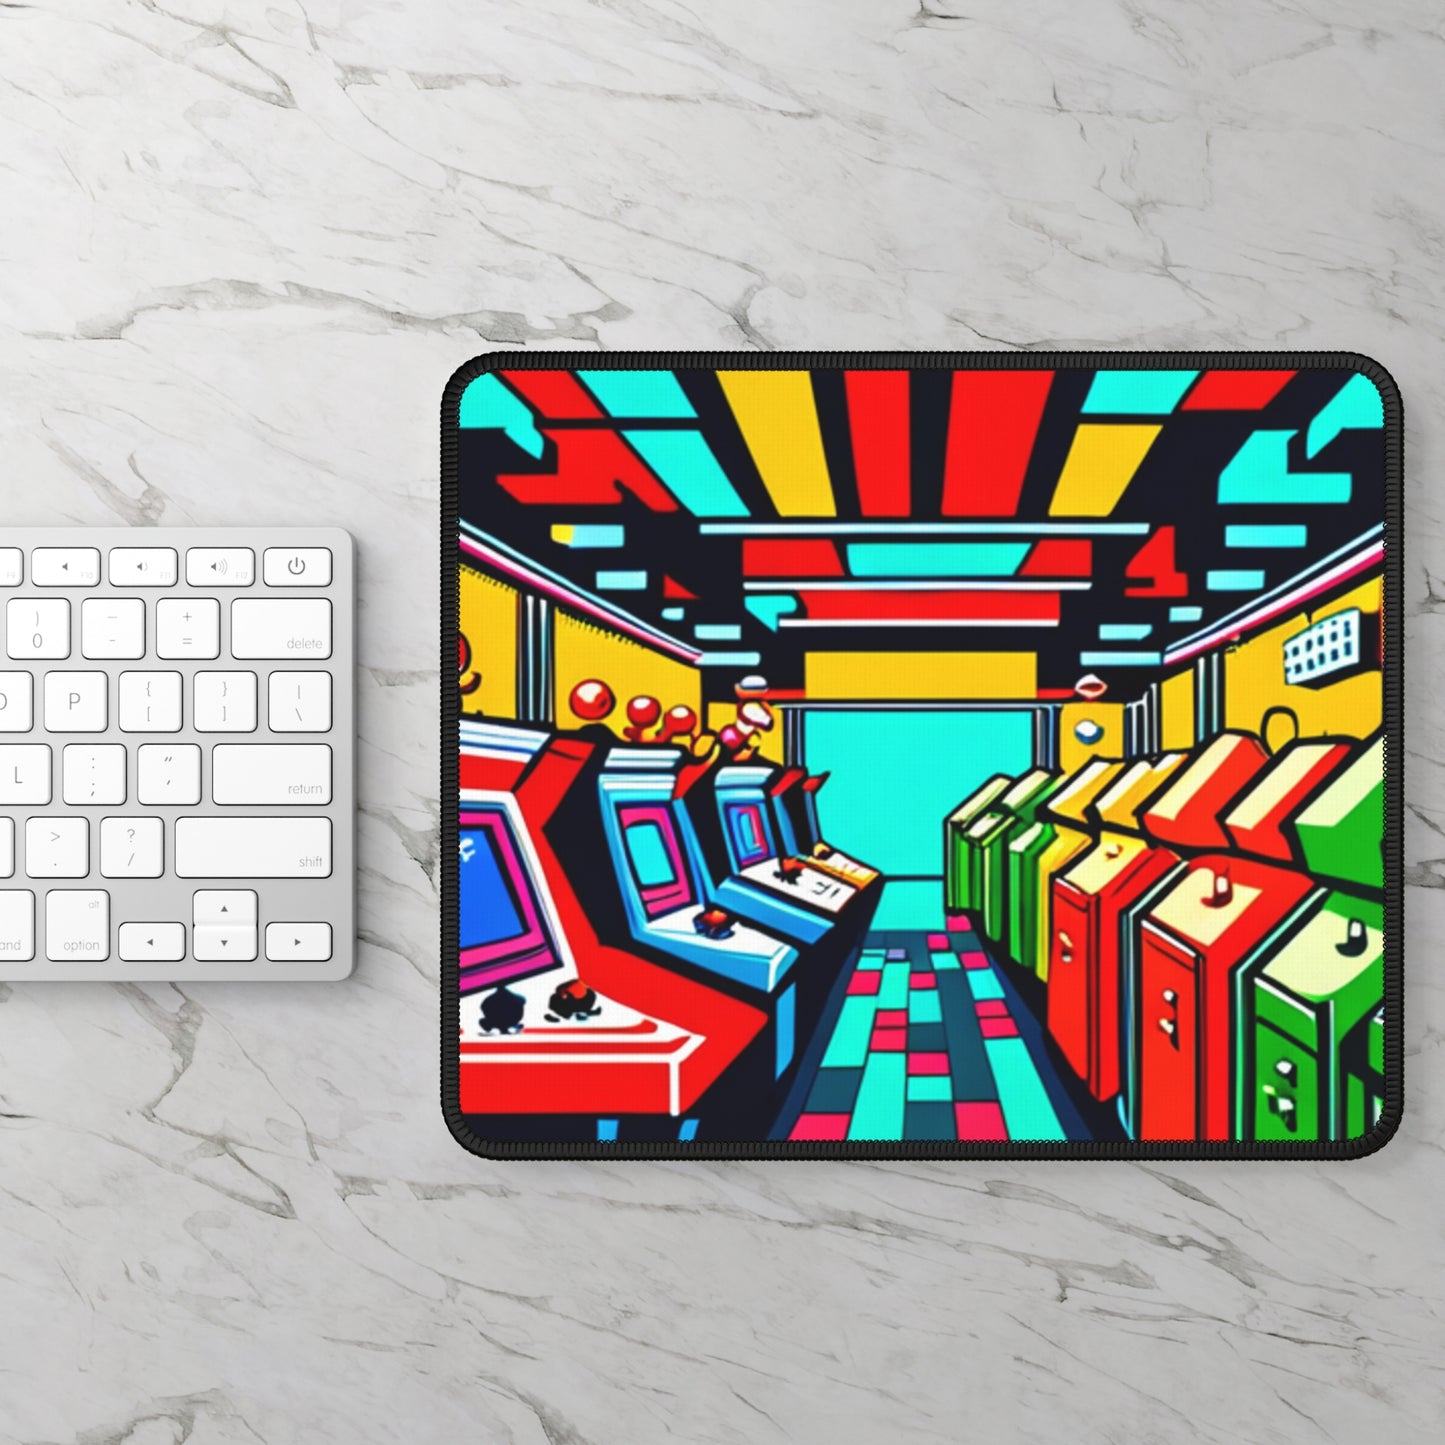 Futuristic Arcade Background Gaming Mouse Pad